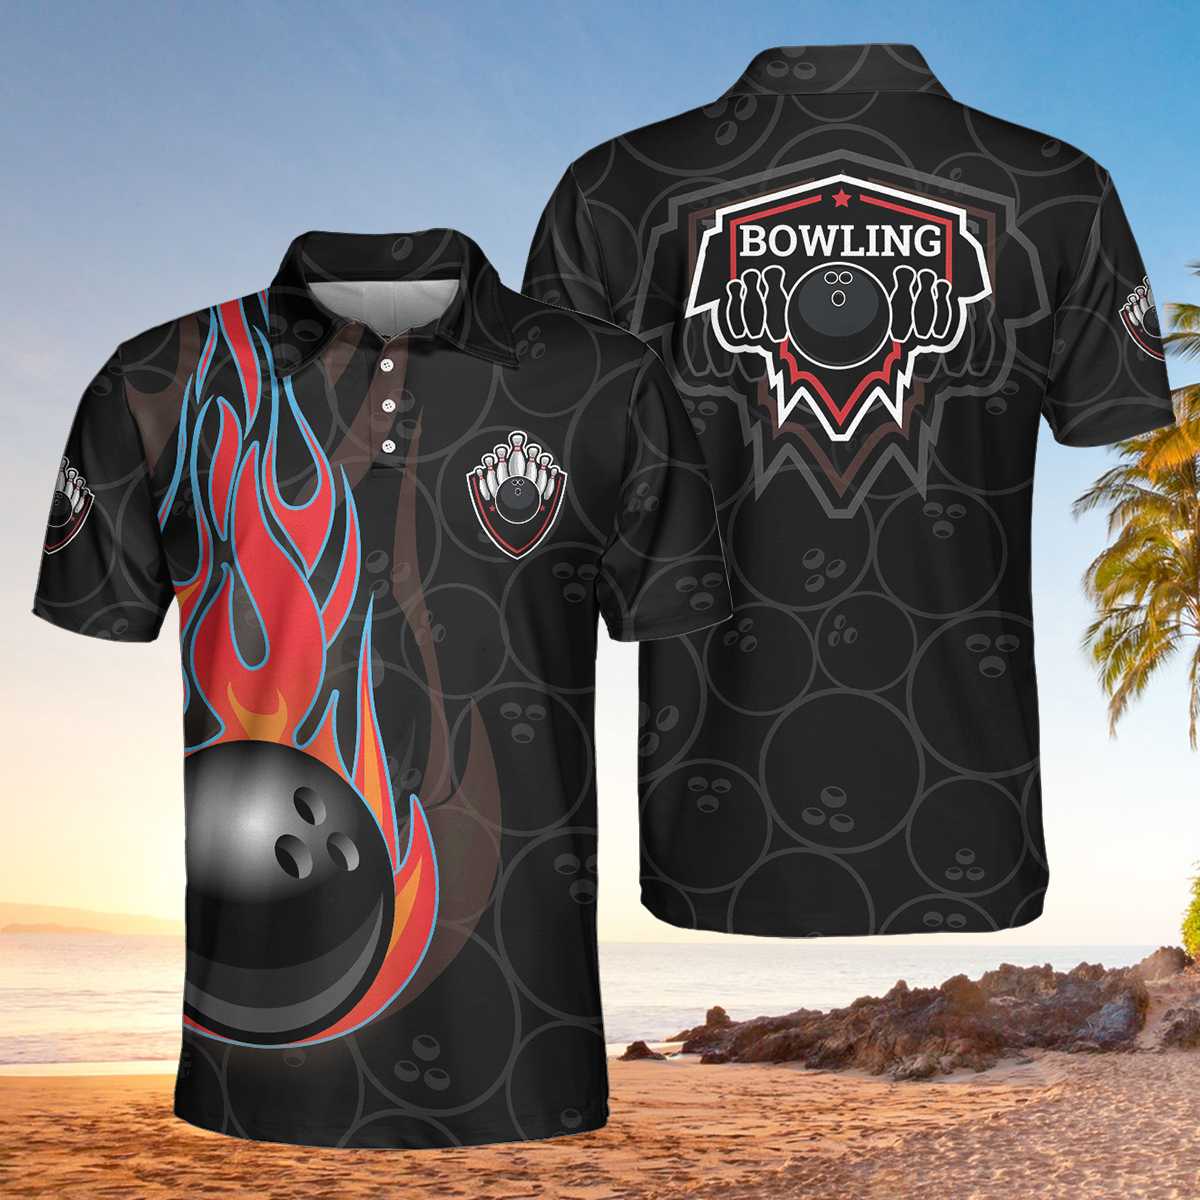 Bowling In Fire And Flag Short Sleeve Polo Shirt/ Bowling Ball Polo Shirt/ Best Bowling Shirt For Men Coolspod